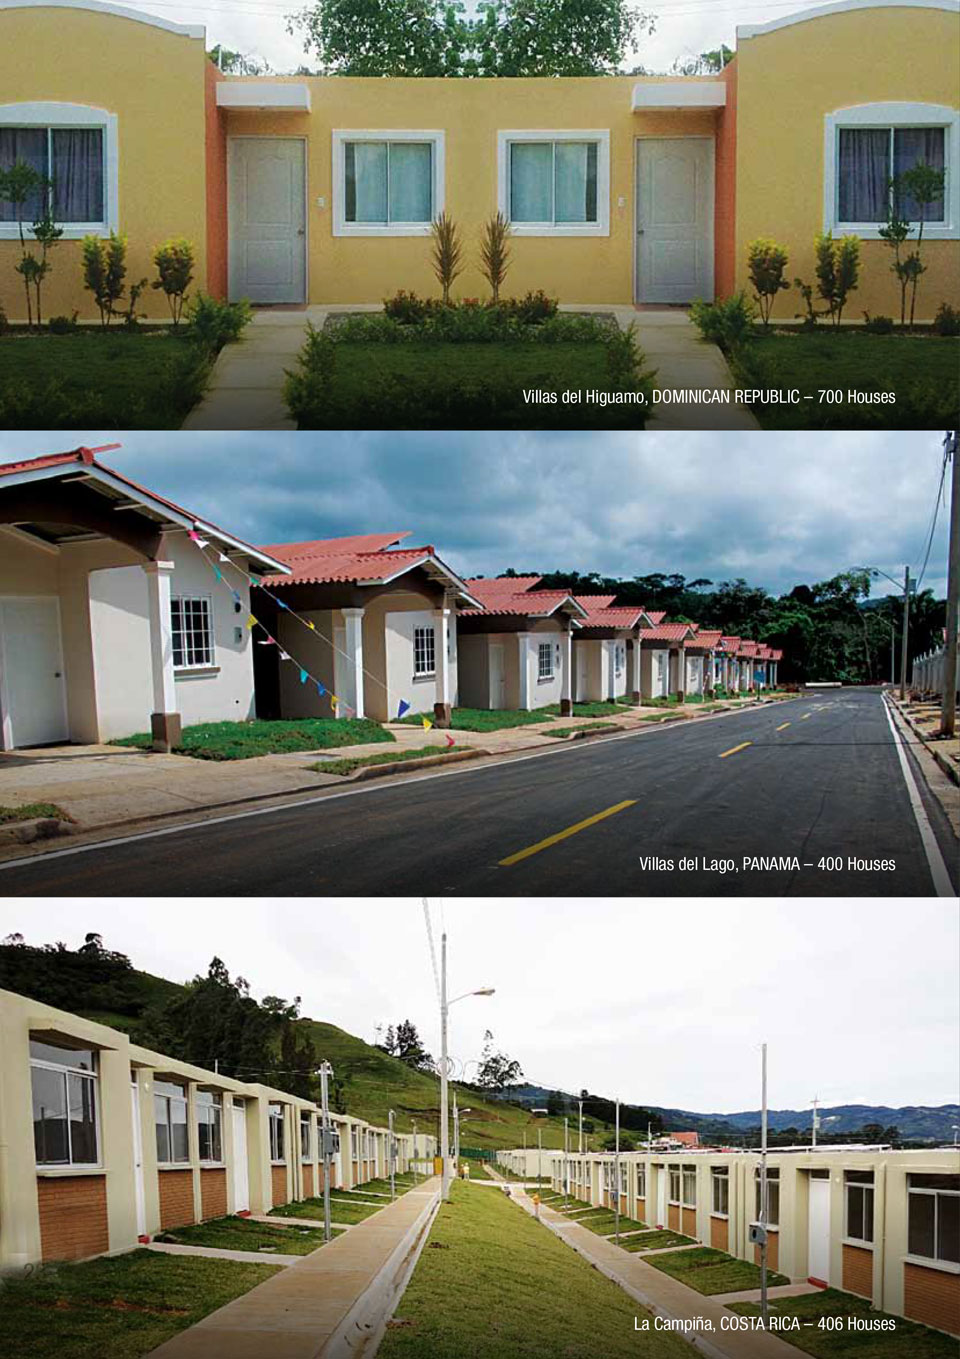 An image showing some of the projects CEMEX has done with the Affordable Housing solution.